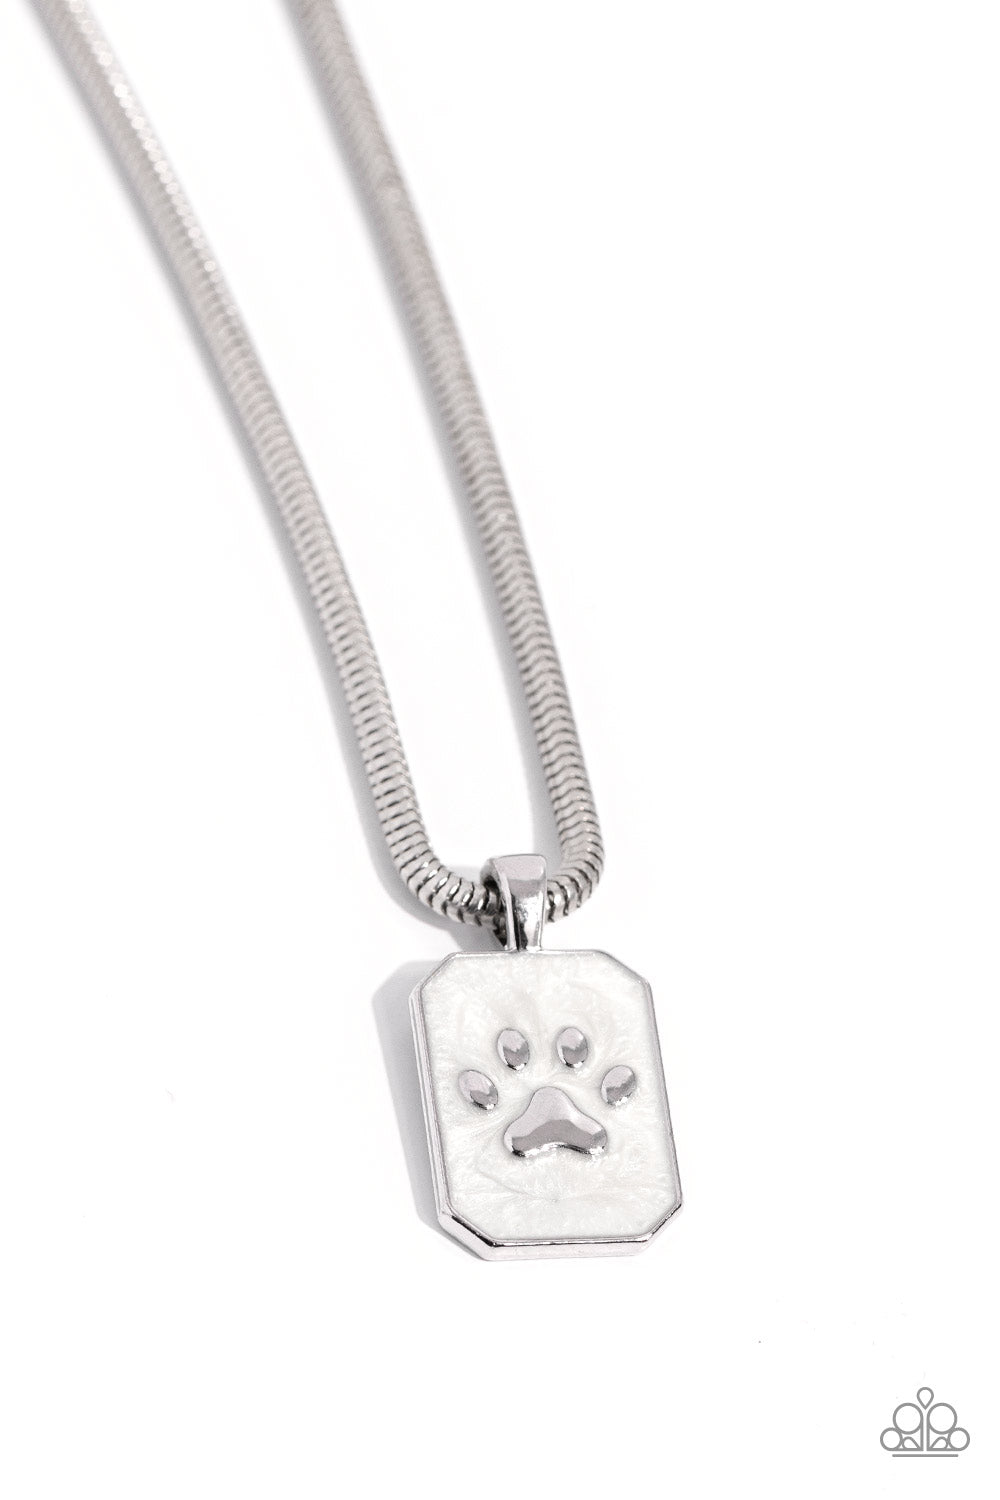 PAW to the Line - Silver Necklace - Paparazzi Accessories - Dangling from a sleek silver snake chain, a rectangular pendant glides down the chest. Featured within the pendant, a silver pawprint, surrounded by white pearl paint creates an elegant pet-inspired pendant.